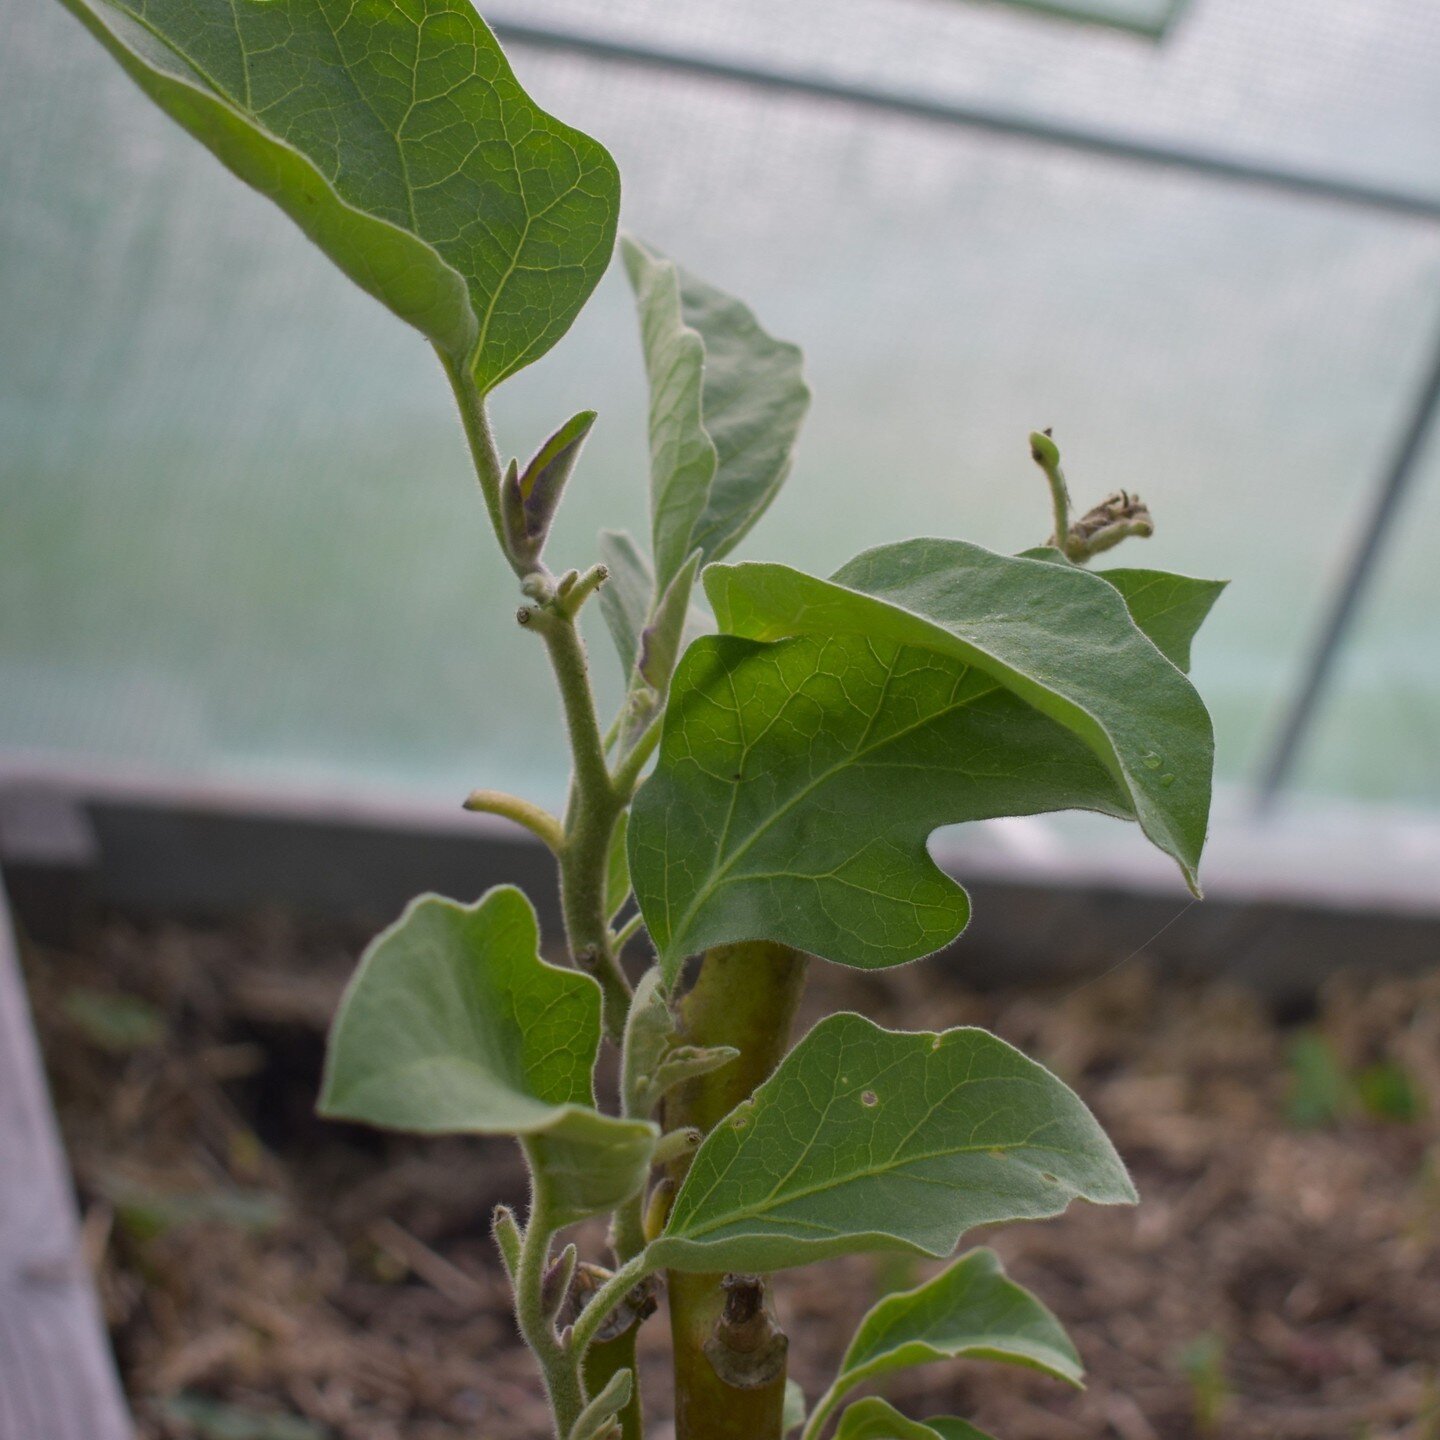 Prepping for Summer! 🌞 

Our Black Beauty eggplant, given a big trim last fall and overwintered in the greenhouse, is sprouting new leaves. It's gearing up for a productive summer season. Here's to second chances and new growth! 

#AmbitiousHarvest 